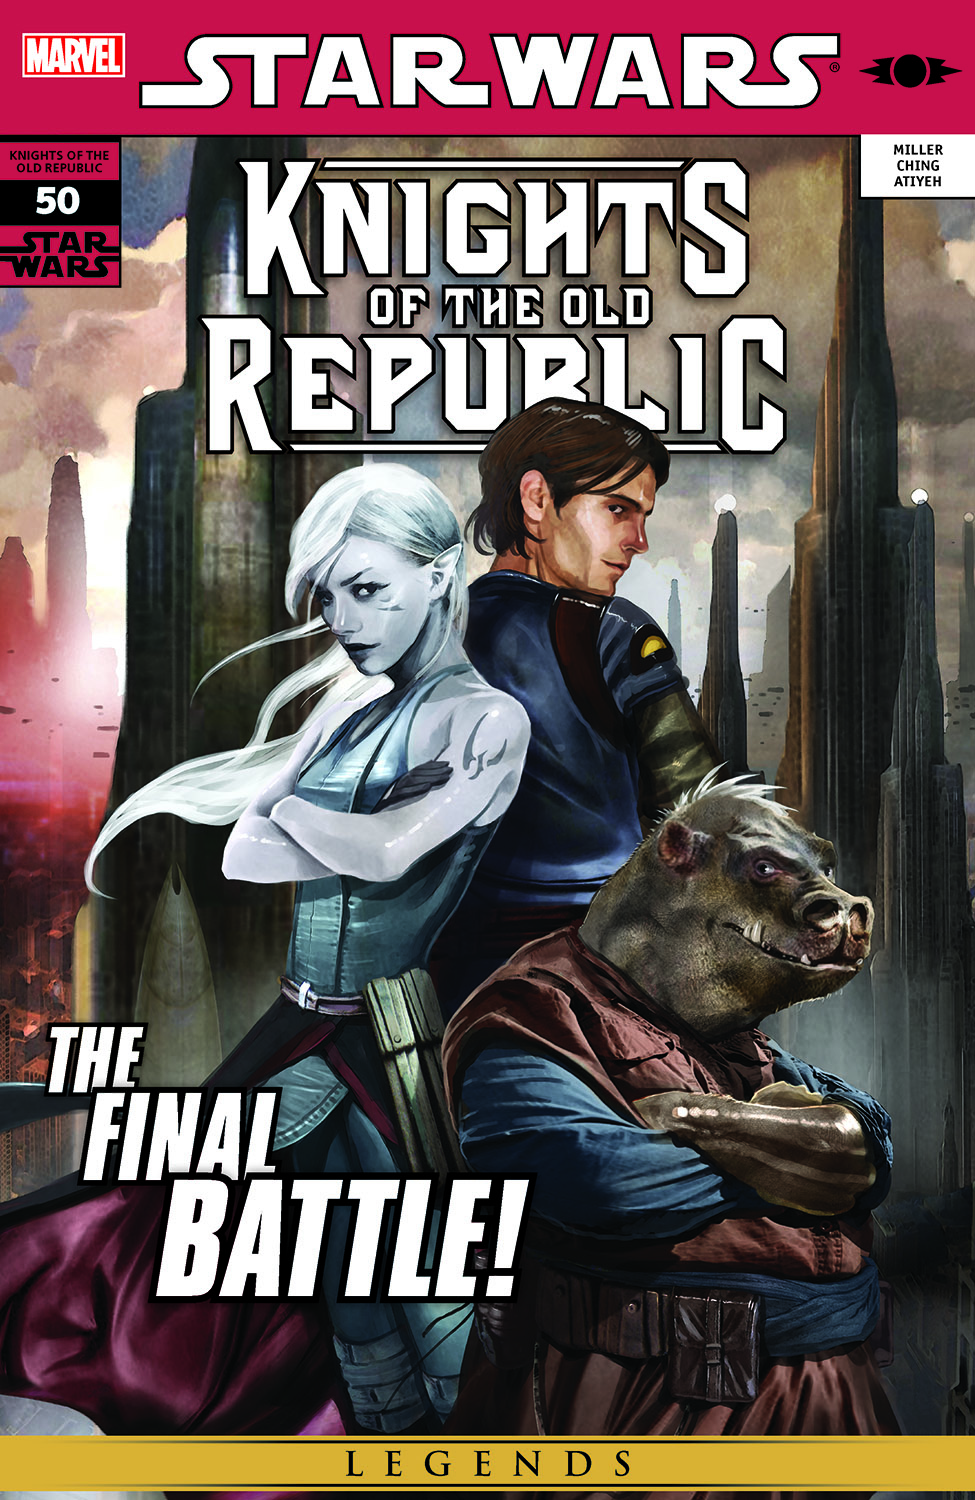 Star Wars: Knights of the Old Republic (2006) #50